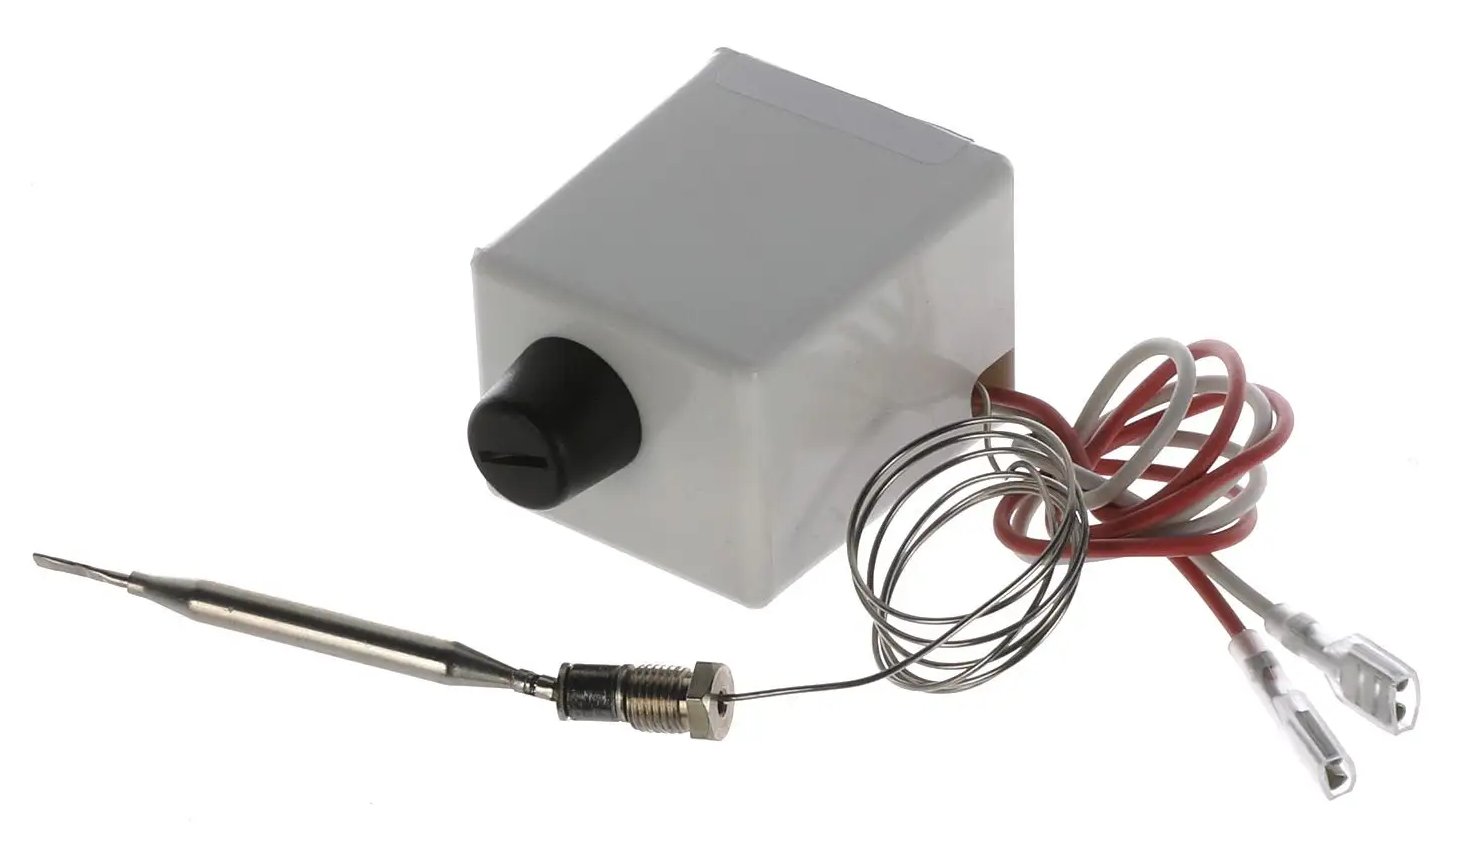 Parry fryer high limit Thermostat for Fryers